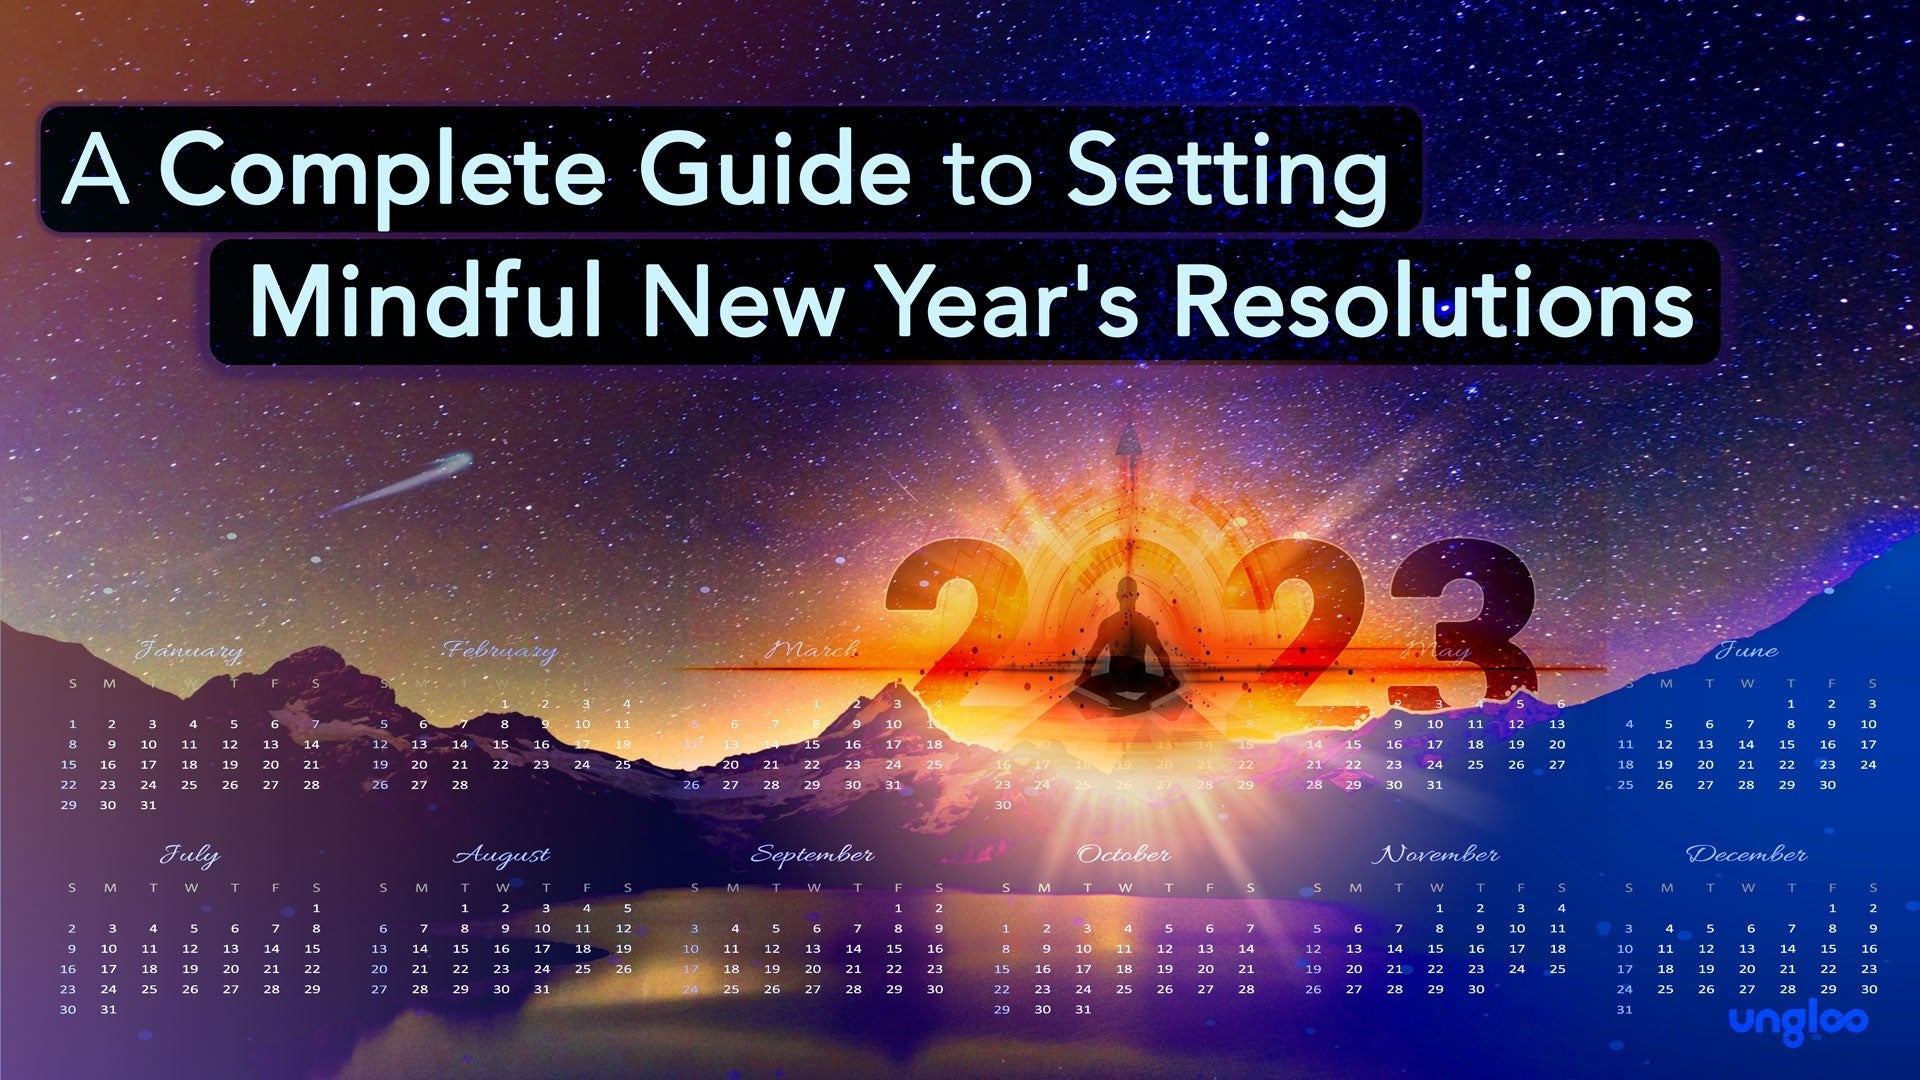 Setting mindful resolutions in the new year